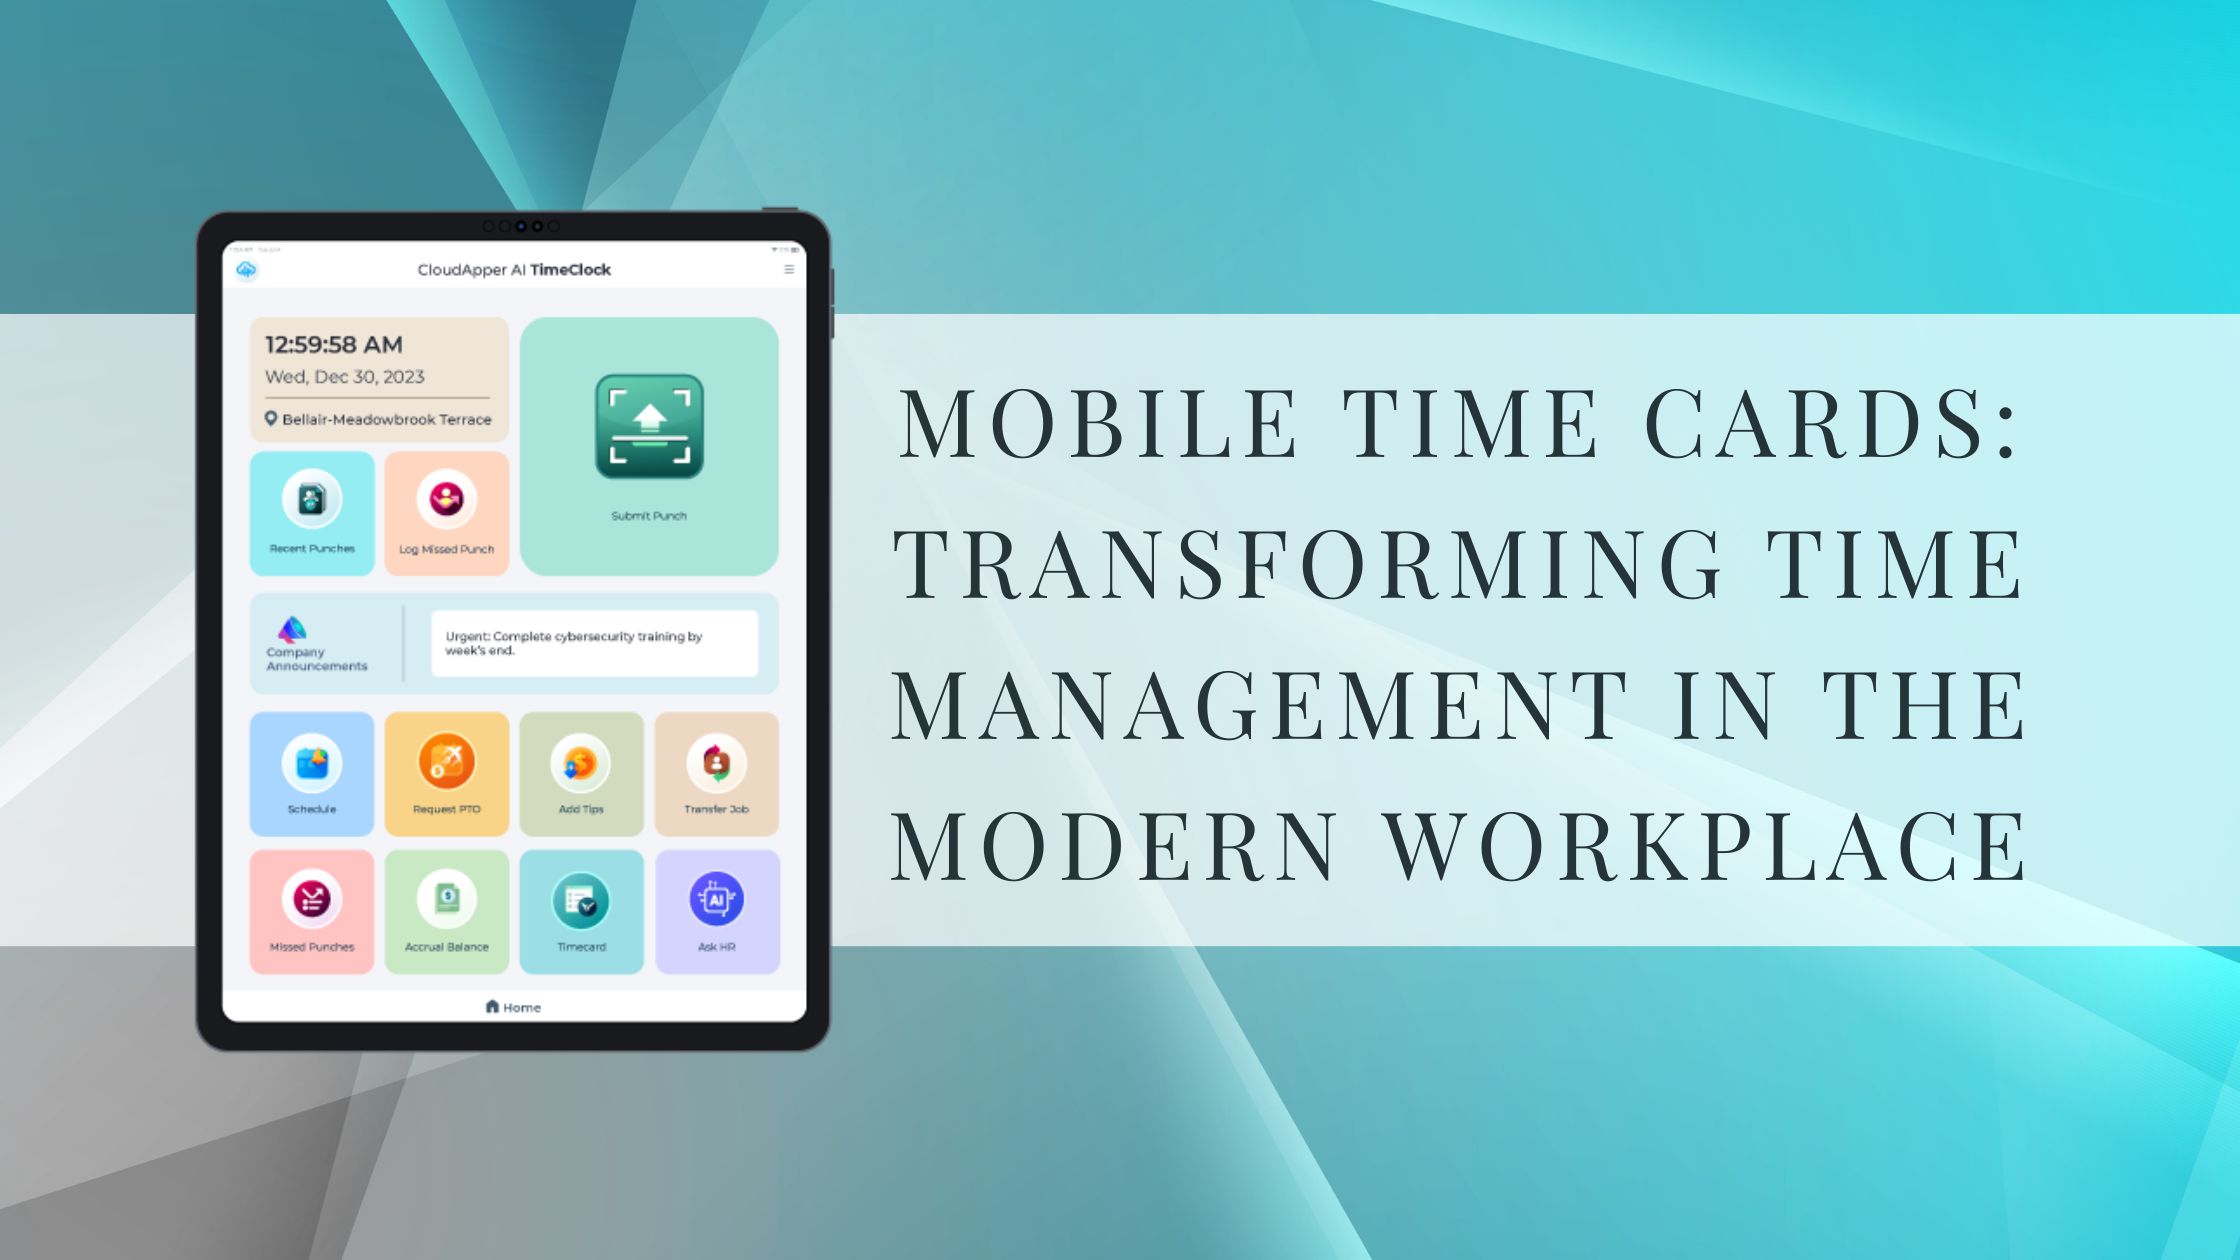 Mobile Time Cards Transforming Time Management in the Modern Workplace